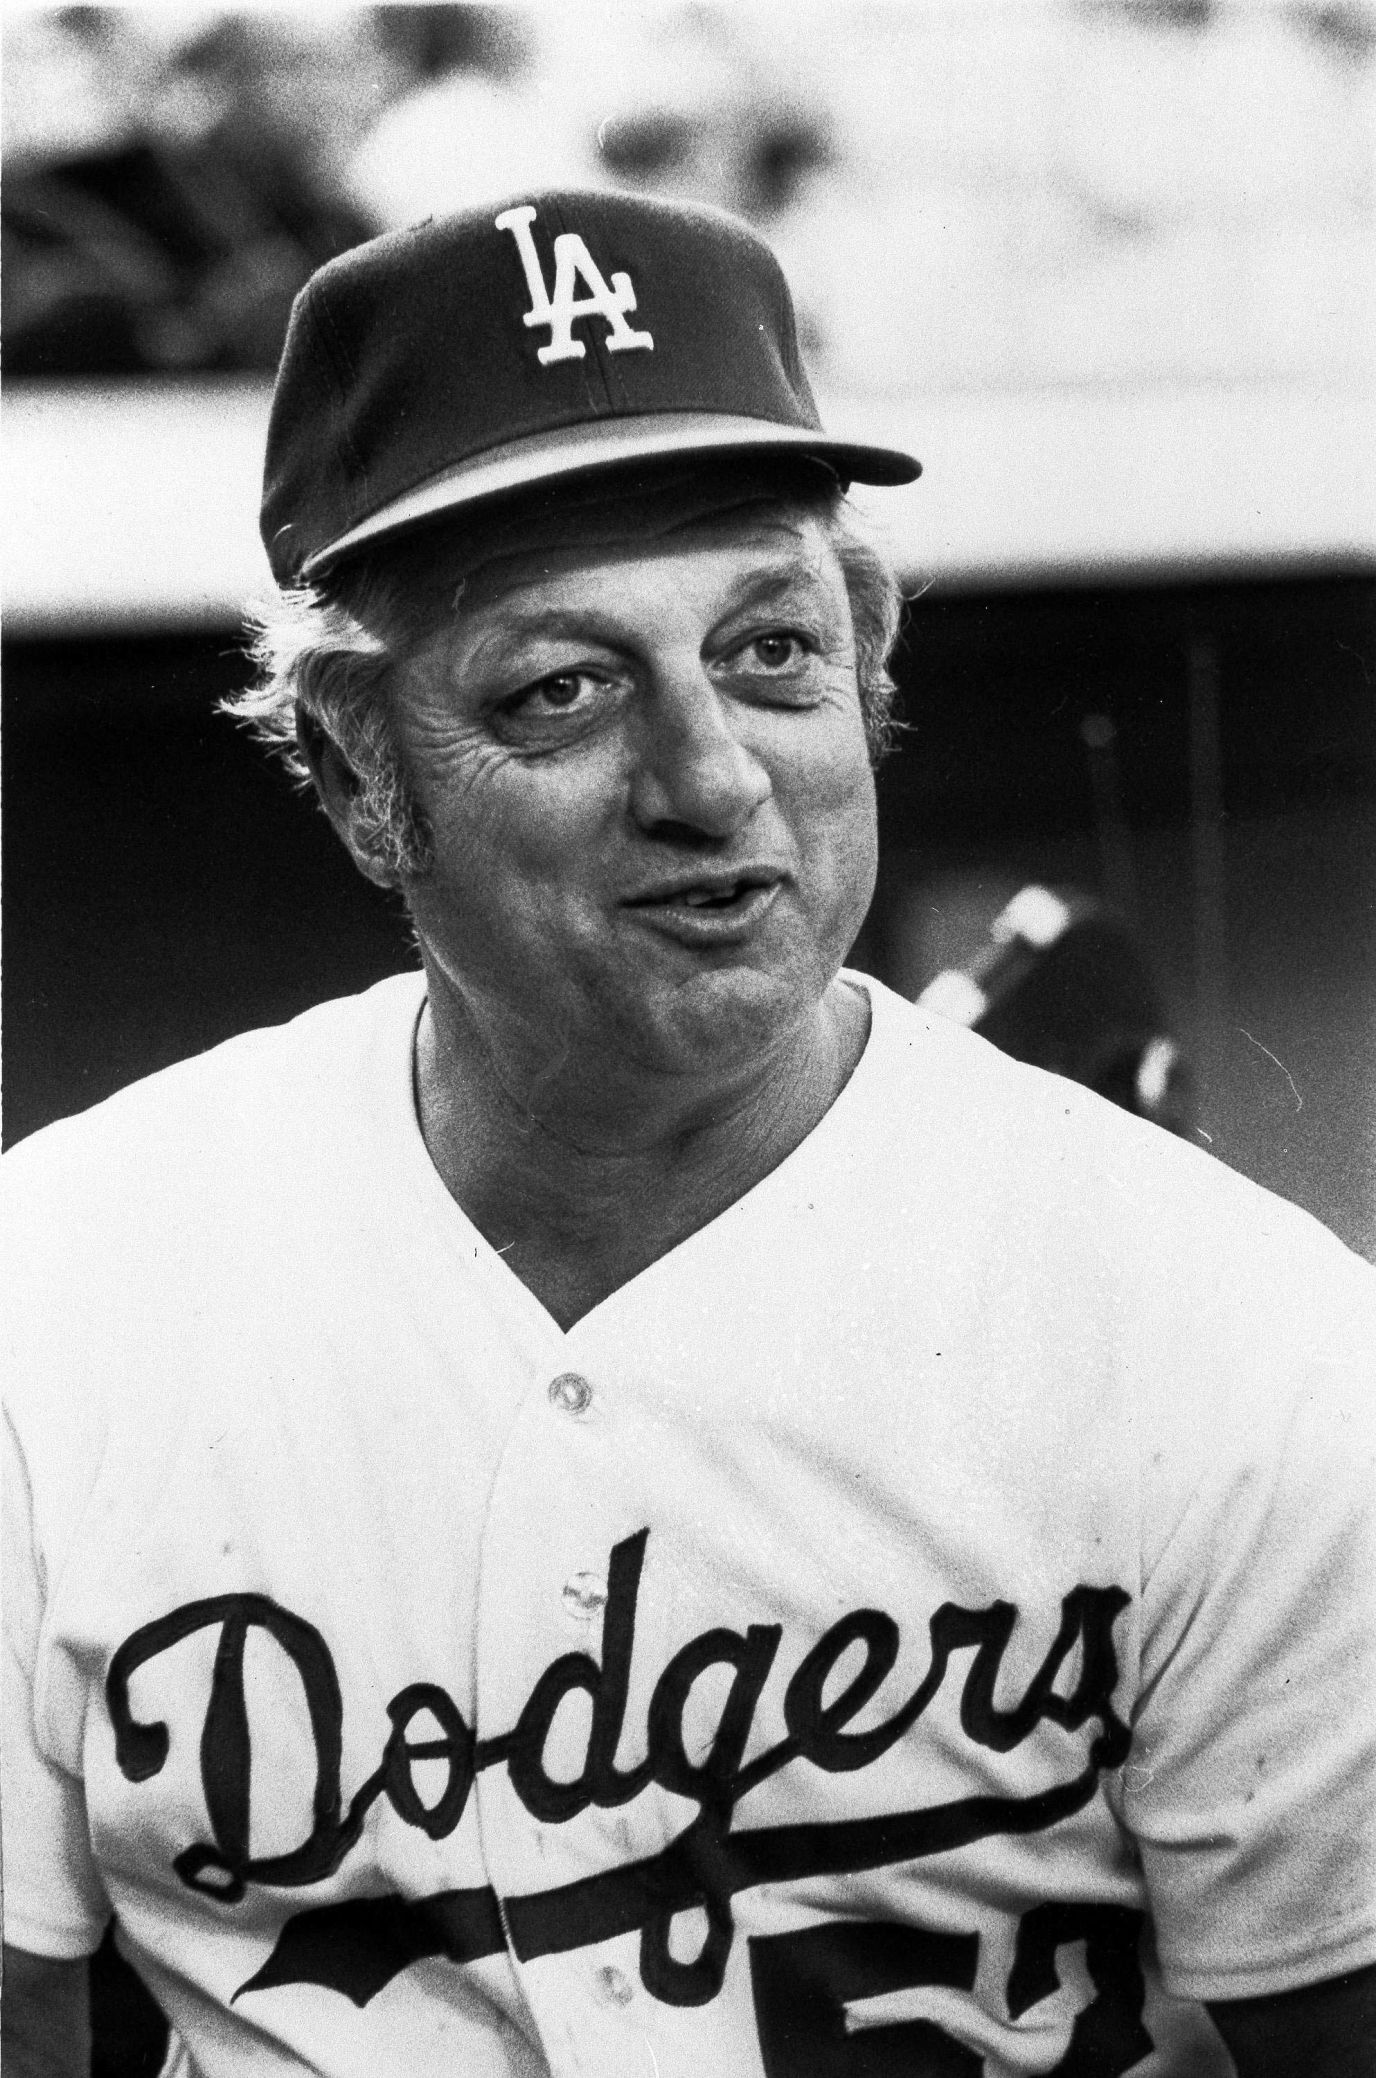 Dodgers pay tribute to Lasorda, 01/20/2021